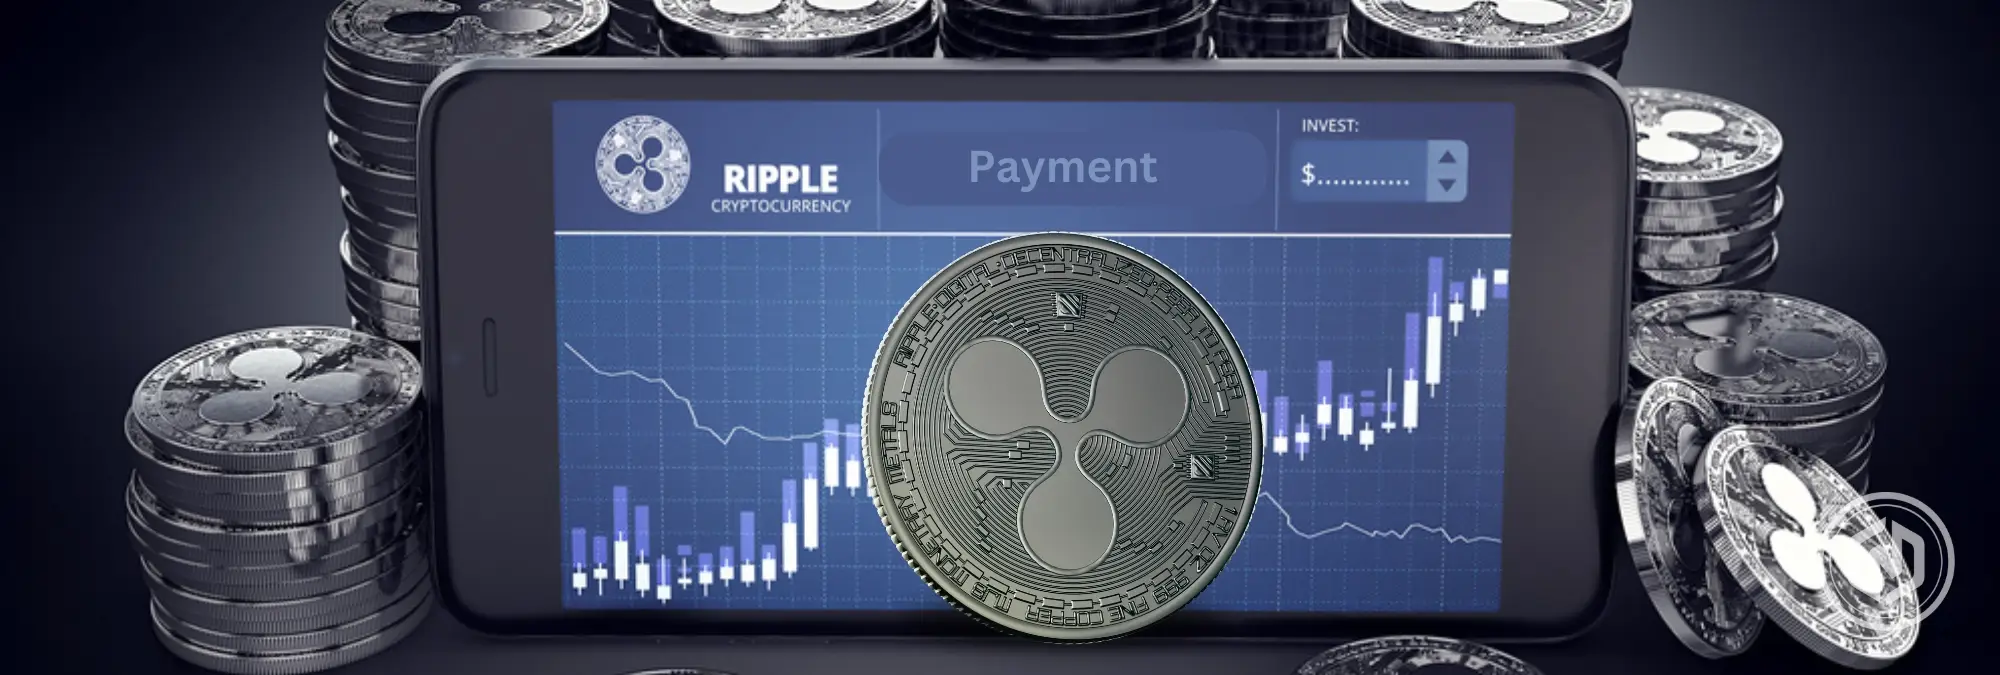 Ripple explains how blockchain can solve payment reconciliation issues